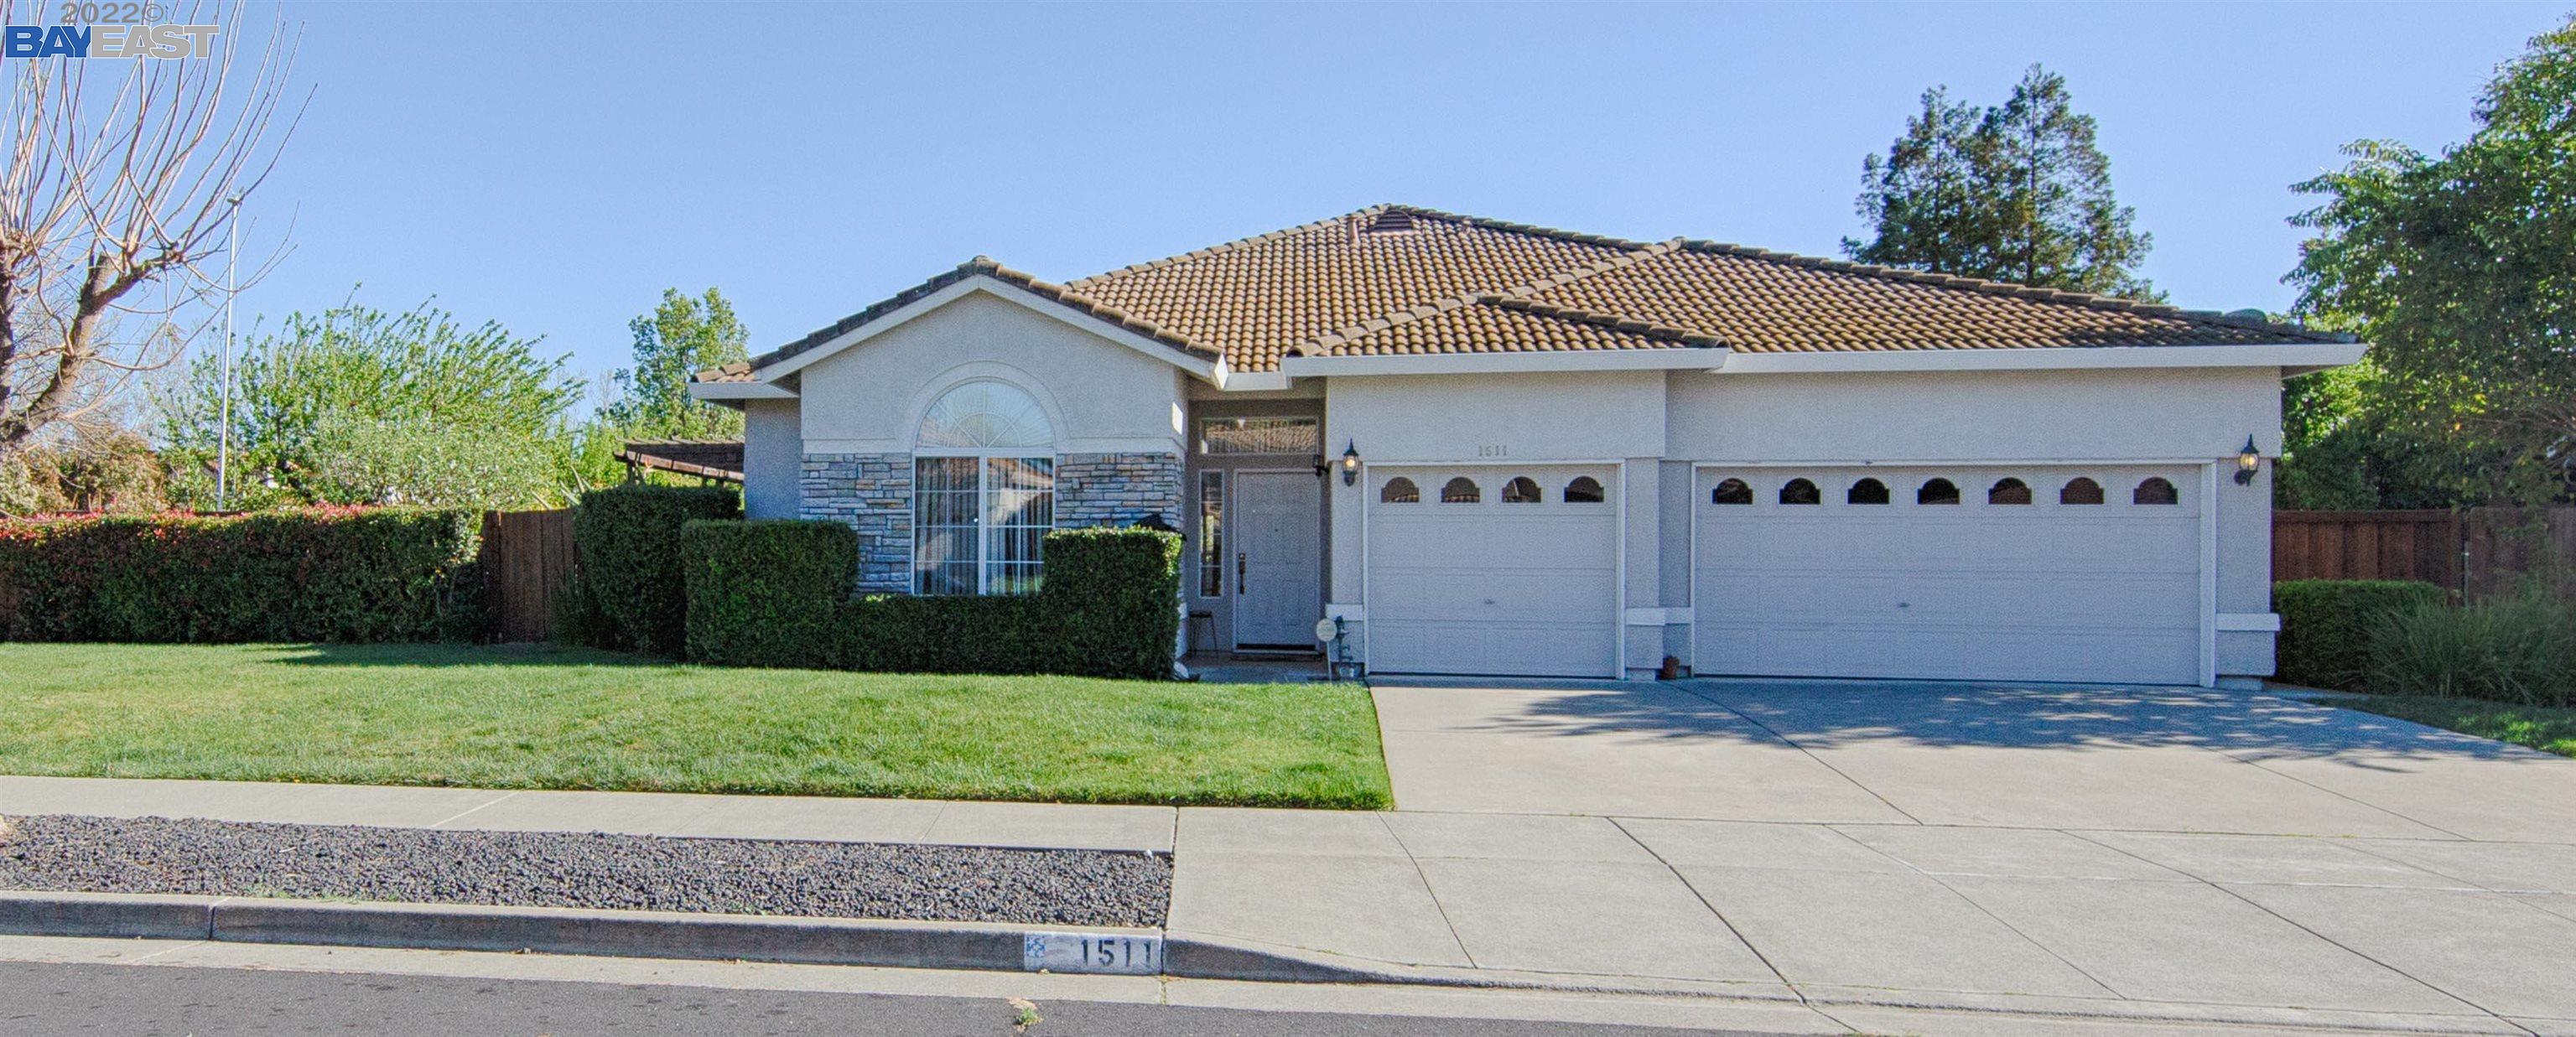 Photo of 1511 Mariposa Wy in Fairfield, CA